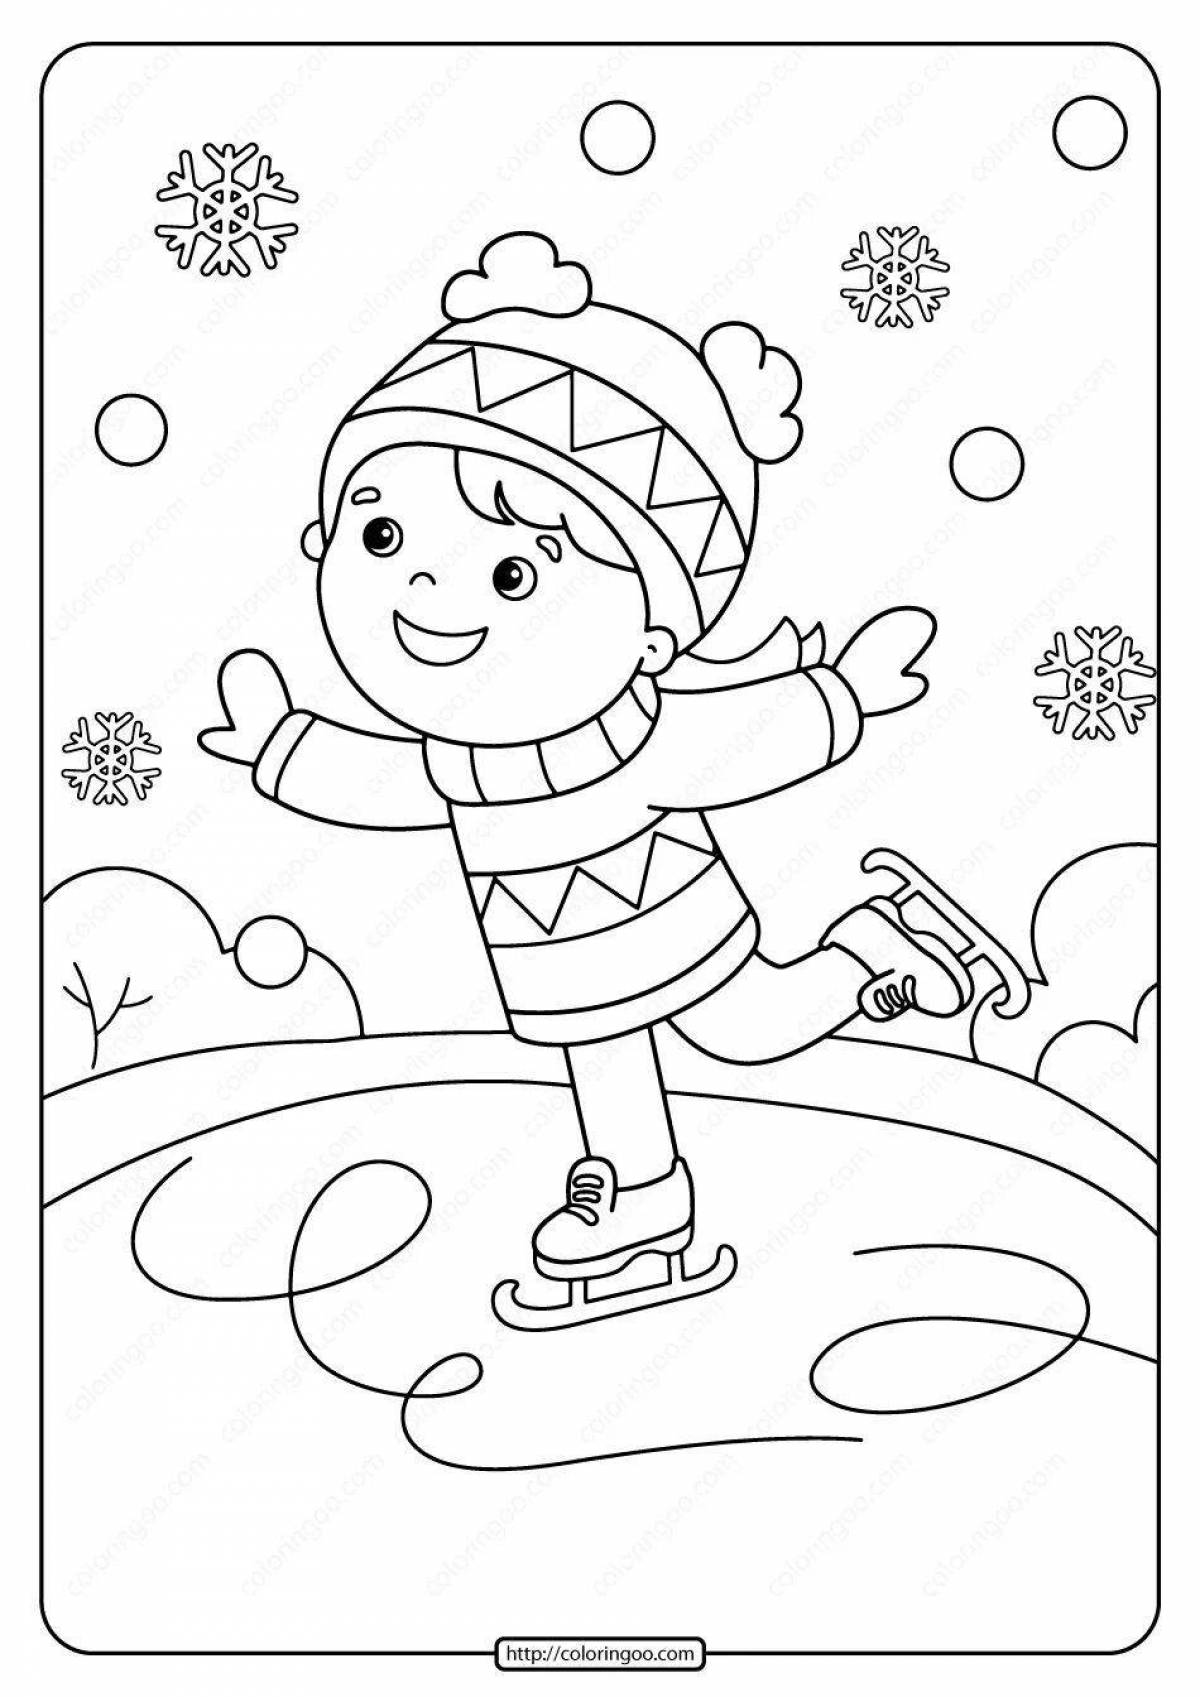 Refreshing winter sports coloring page